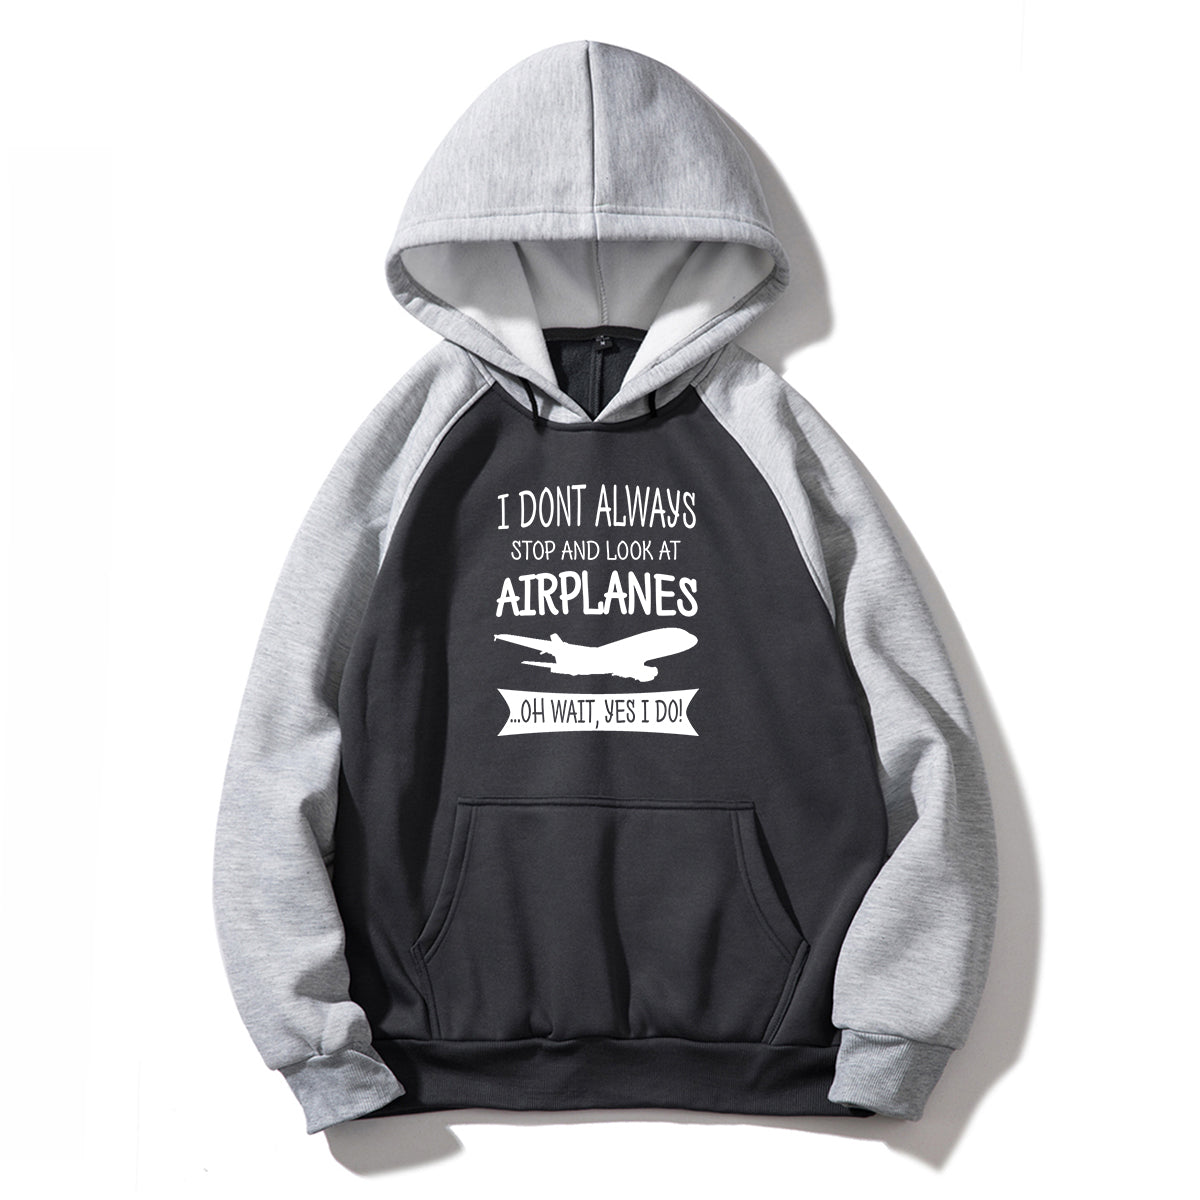 I Don't Always Stop and Look at Airplanes Designed Colourful Hoodies